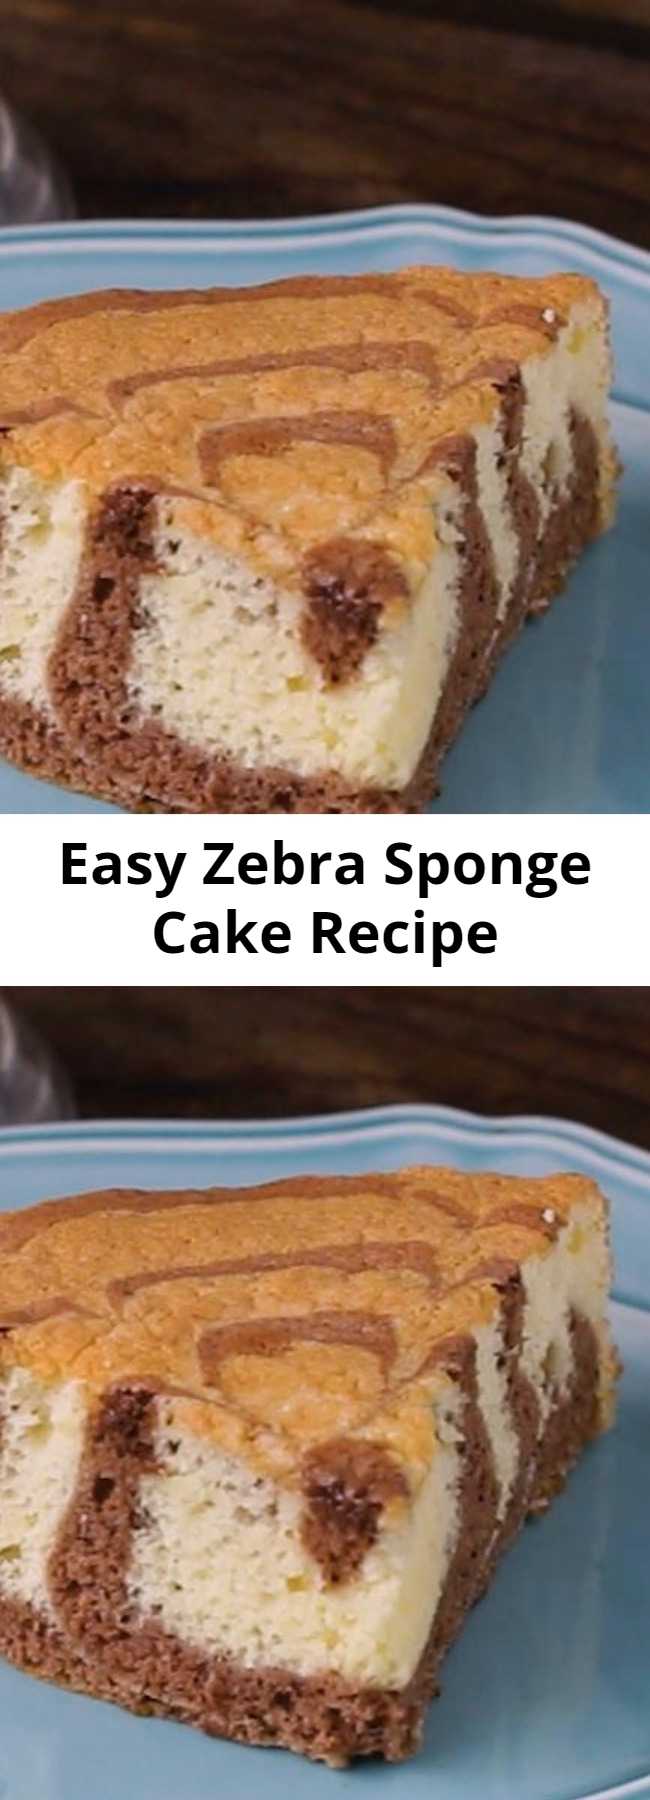 Easy Zebra Sponge Cake Recipe - We wanted a sponge cake recipe that gave us a fairly light cake, one with a springy but delicate texture that could stand up nicely to custard fillings.